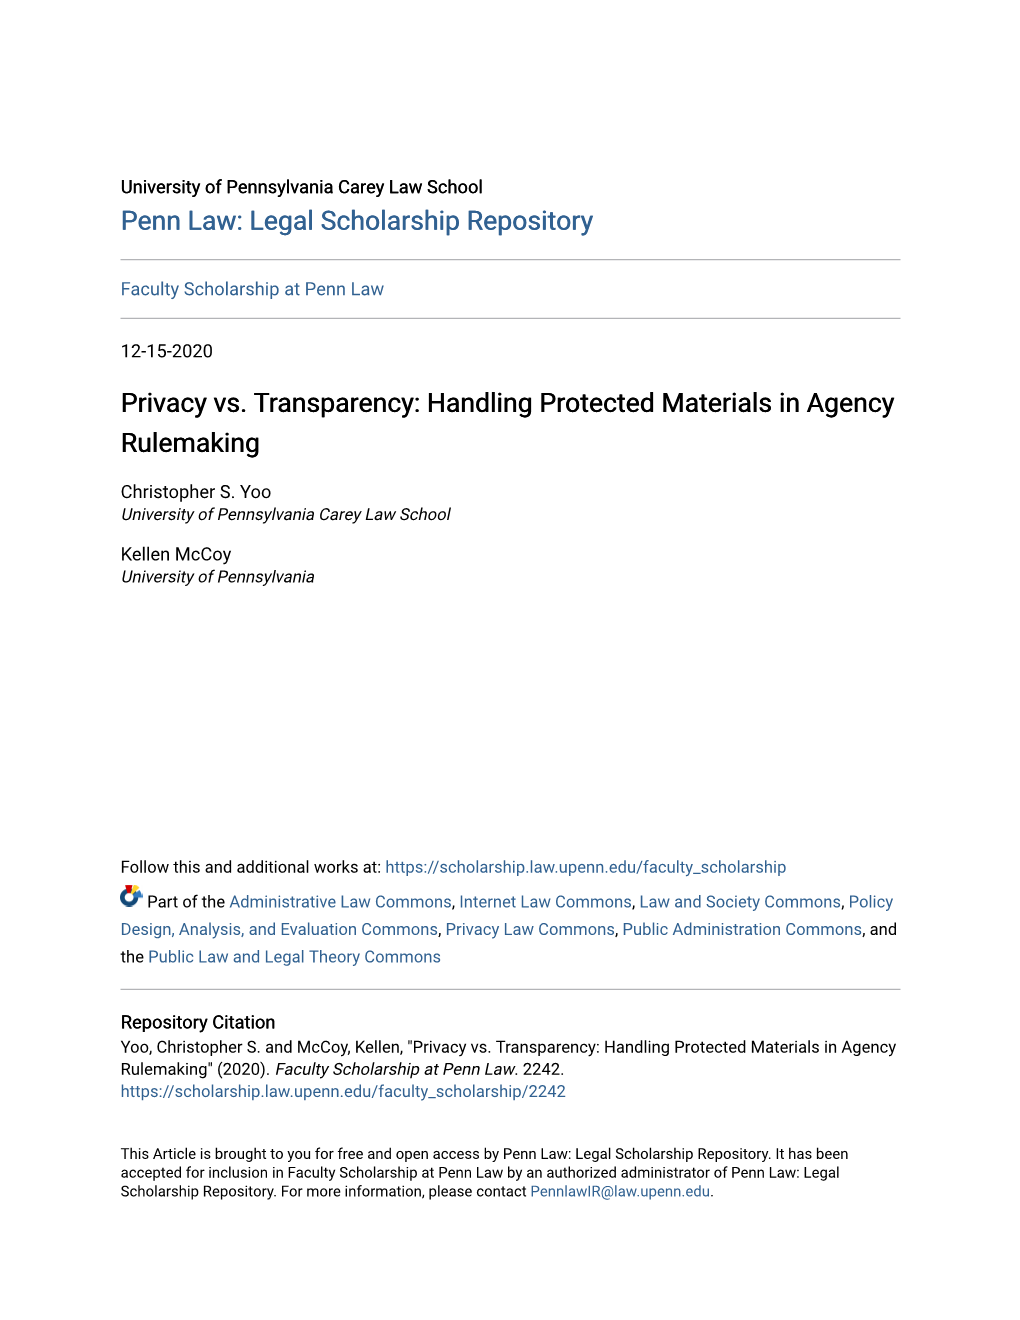 Handling Protected Materials in Agency Rulemaking